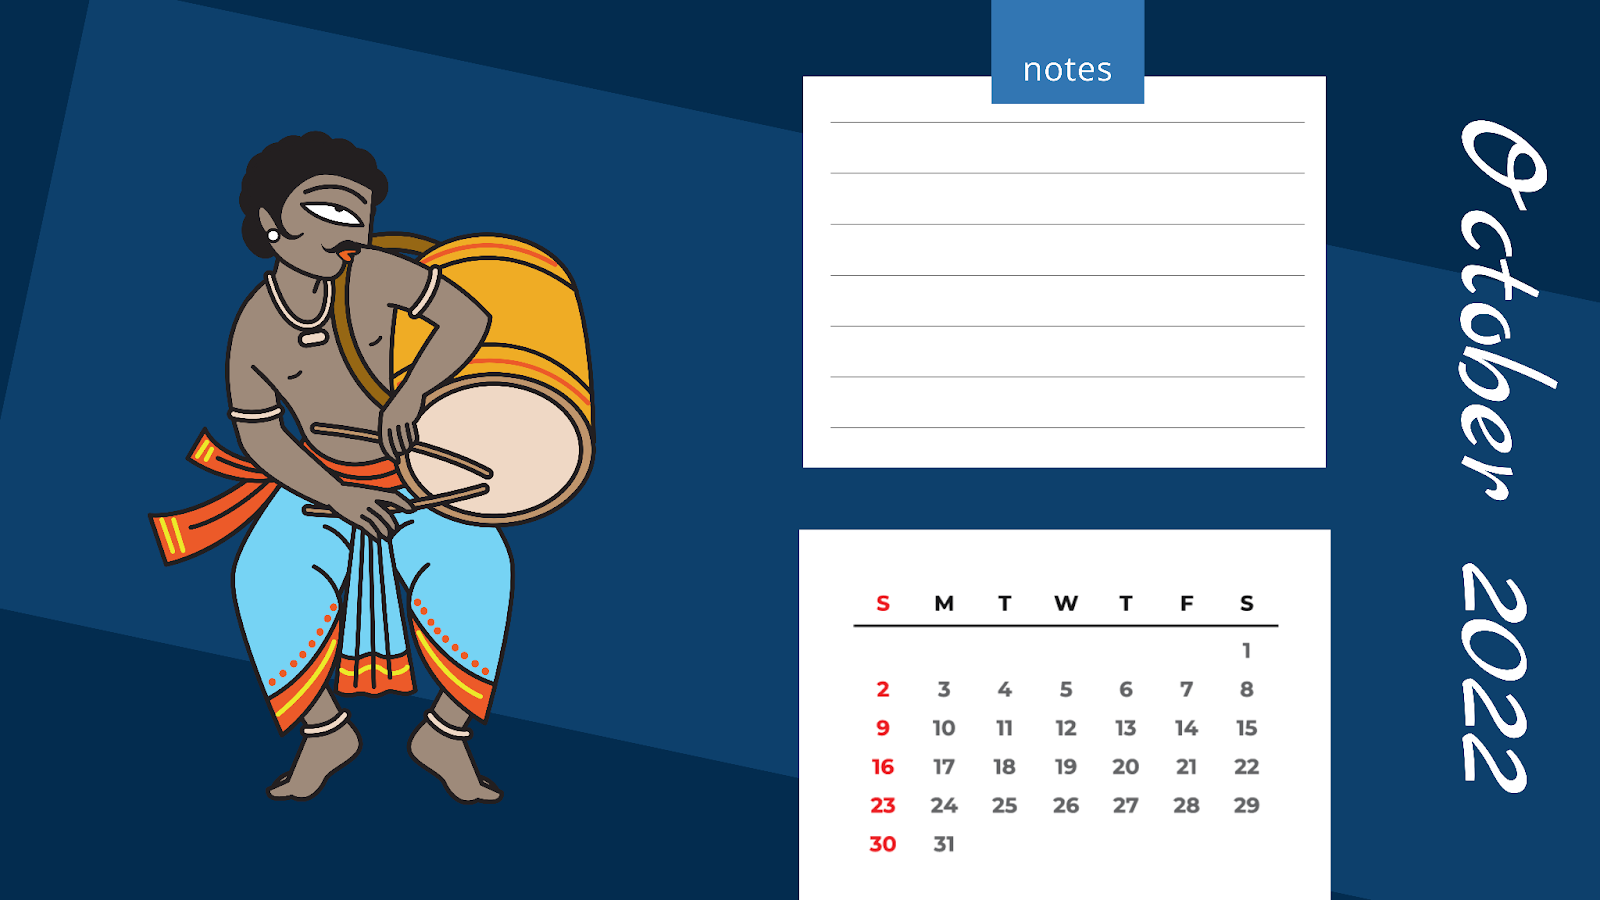 Customized Calendar October month with DrawHipo's Art of Bengal Illustrations  